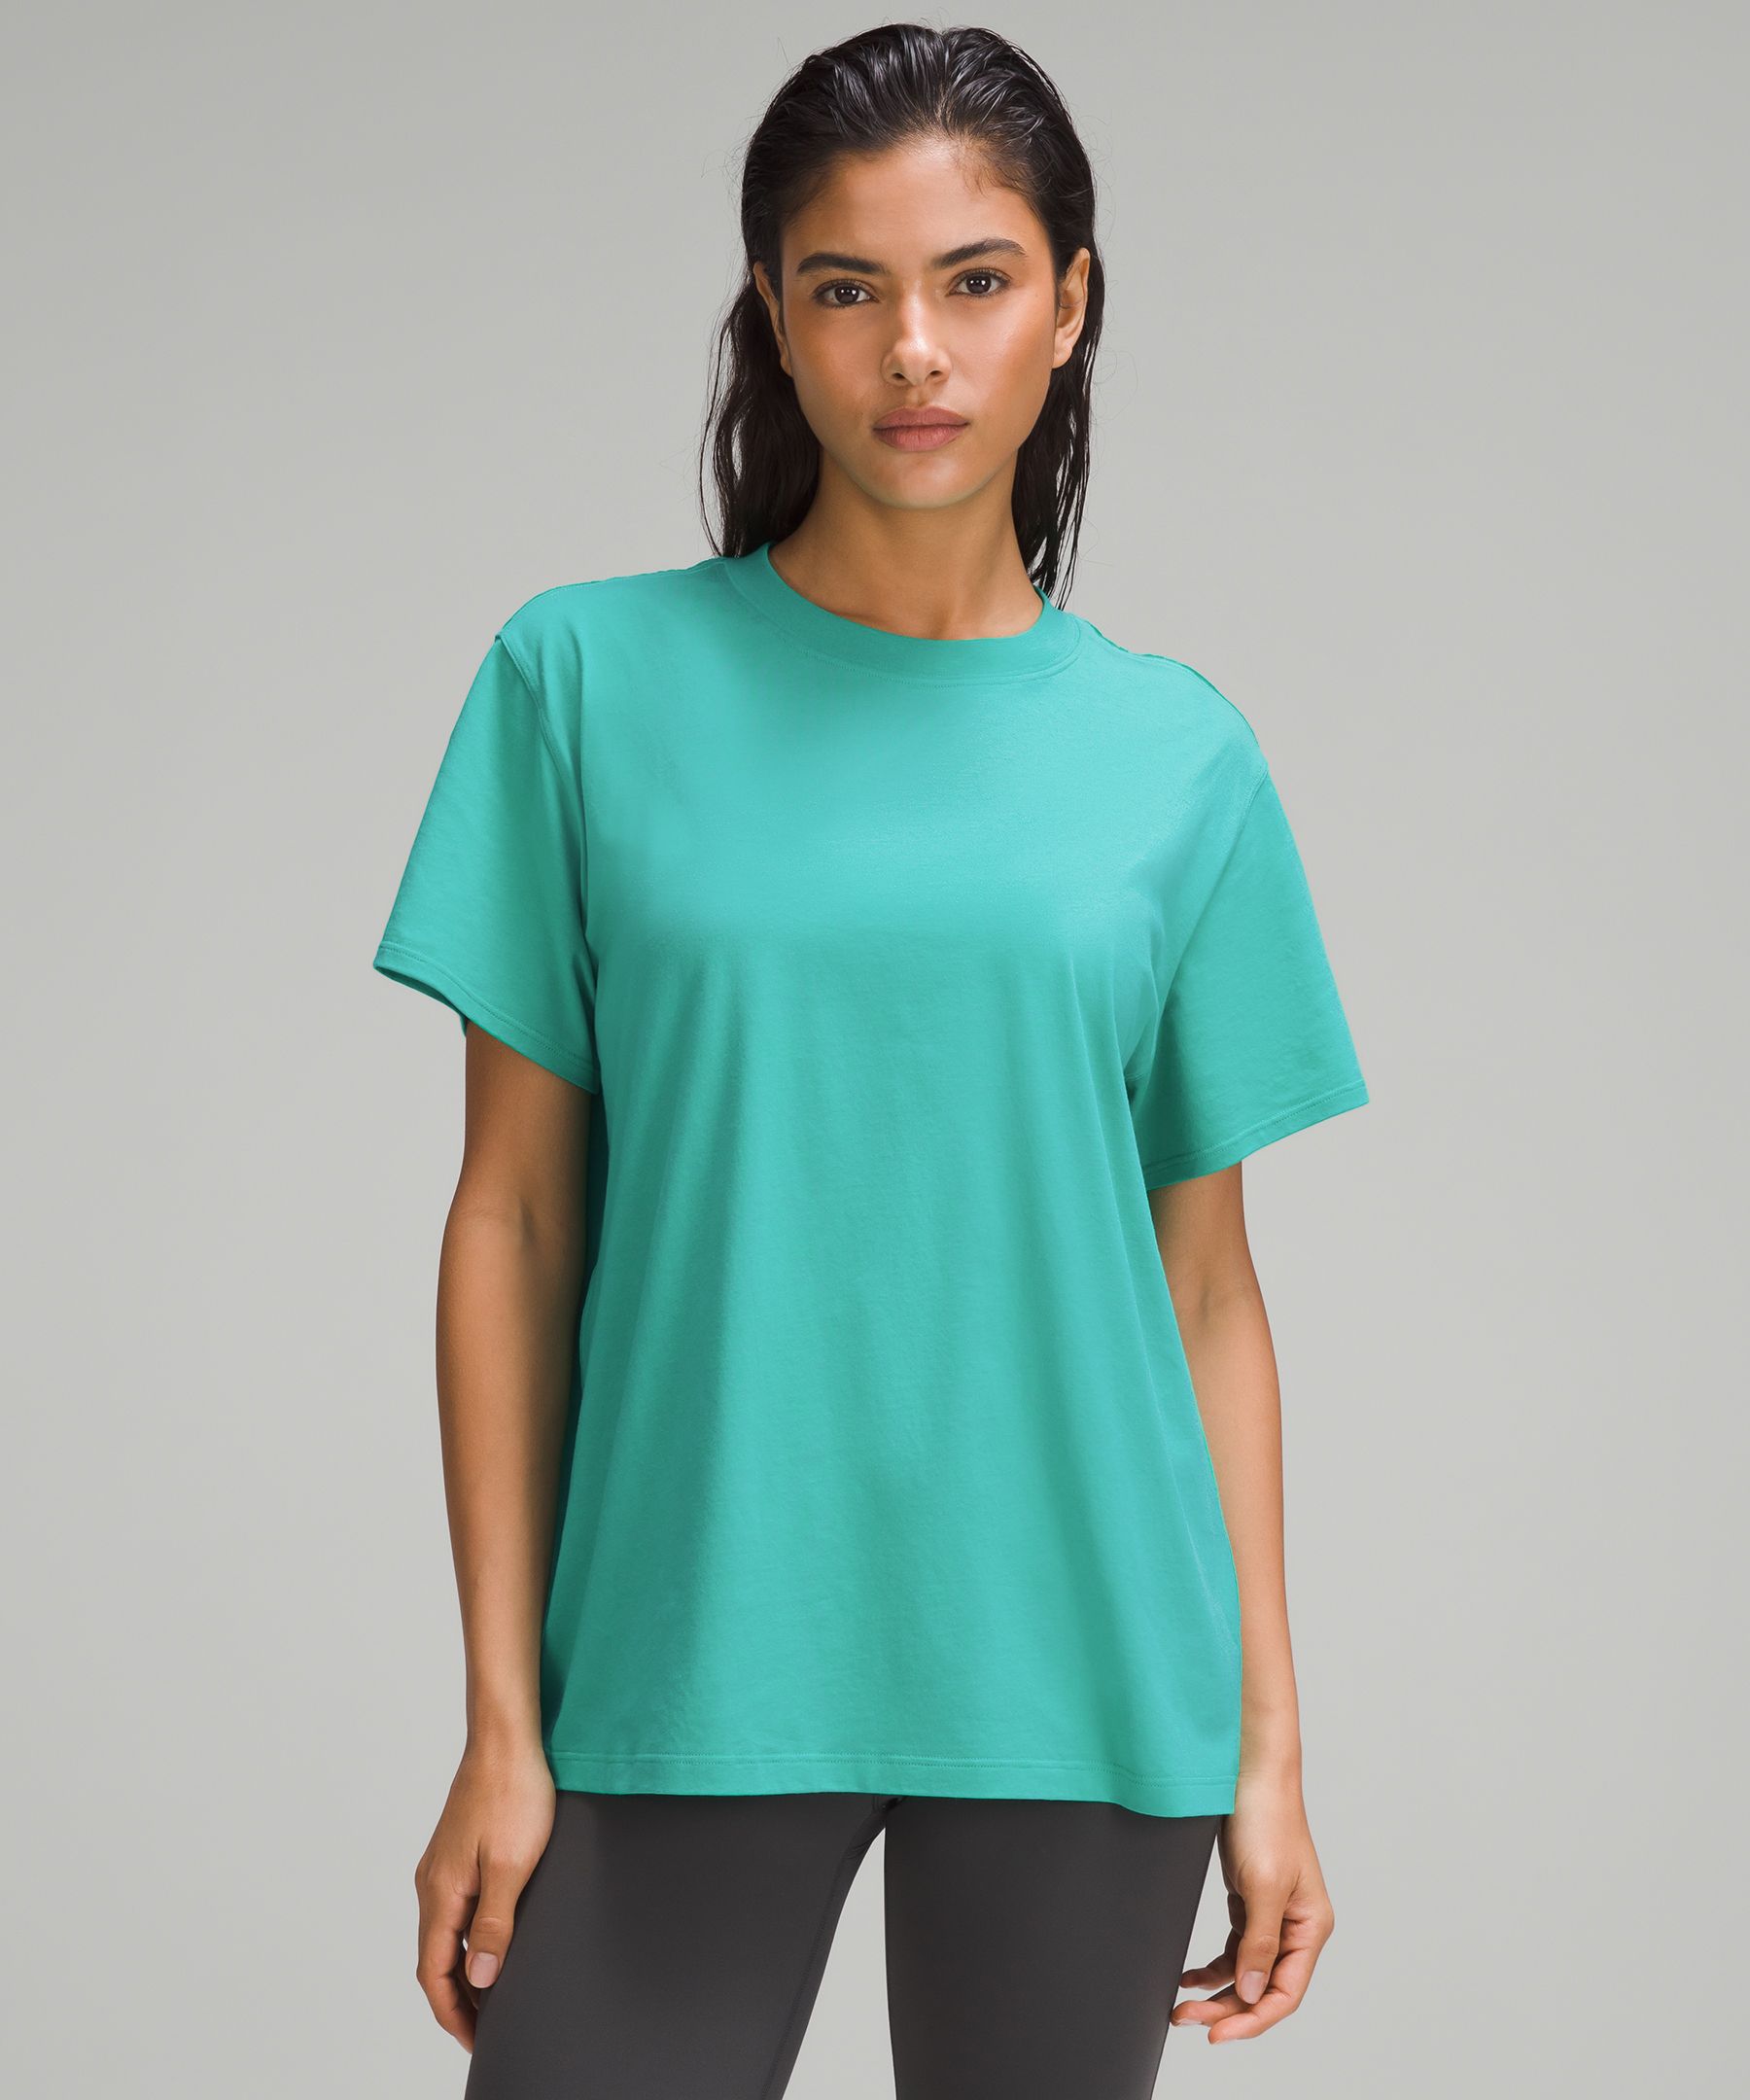 Lululemon All Yours Cotton T-shirt